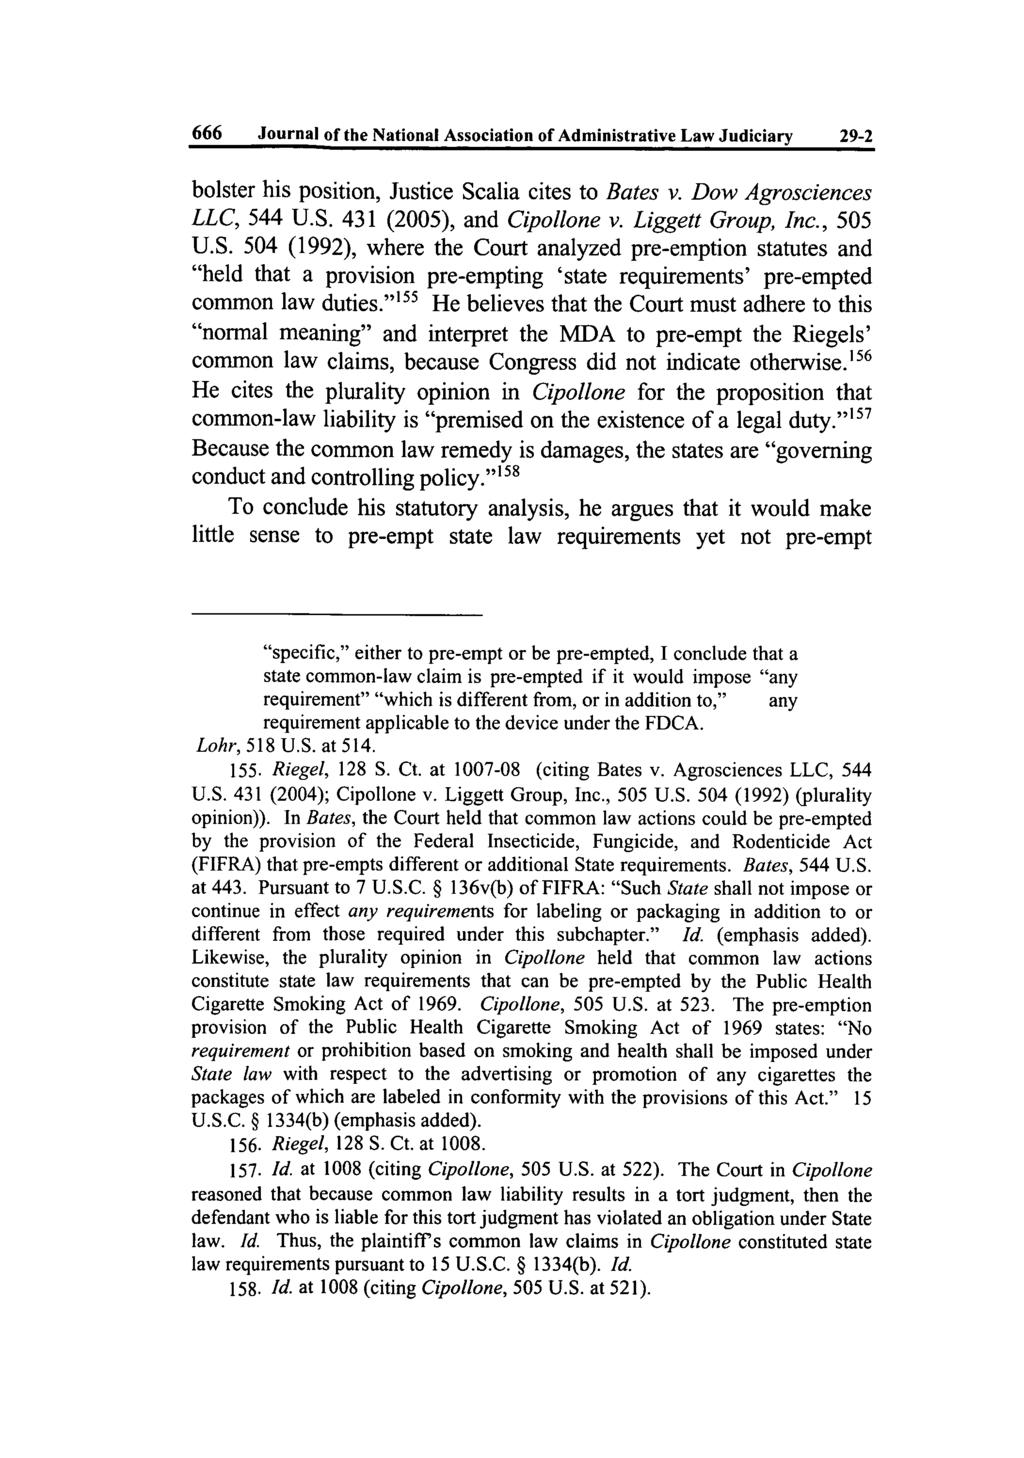 666 Journal of the National Association of Administrative Law Judiciary 29-2 bolster his position, Justice Scalia cites to Bates v. Dow Agrosciences LLC, 544 U.S. 431 (2005), and Cipollone v.